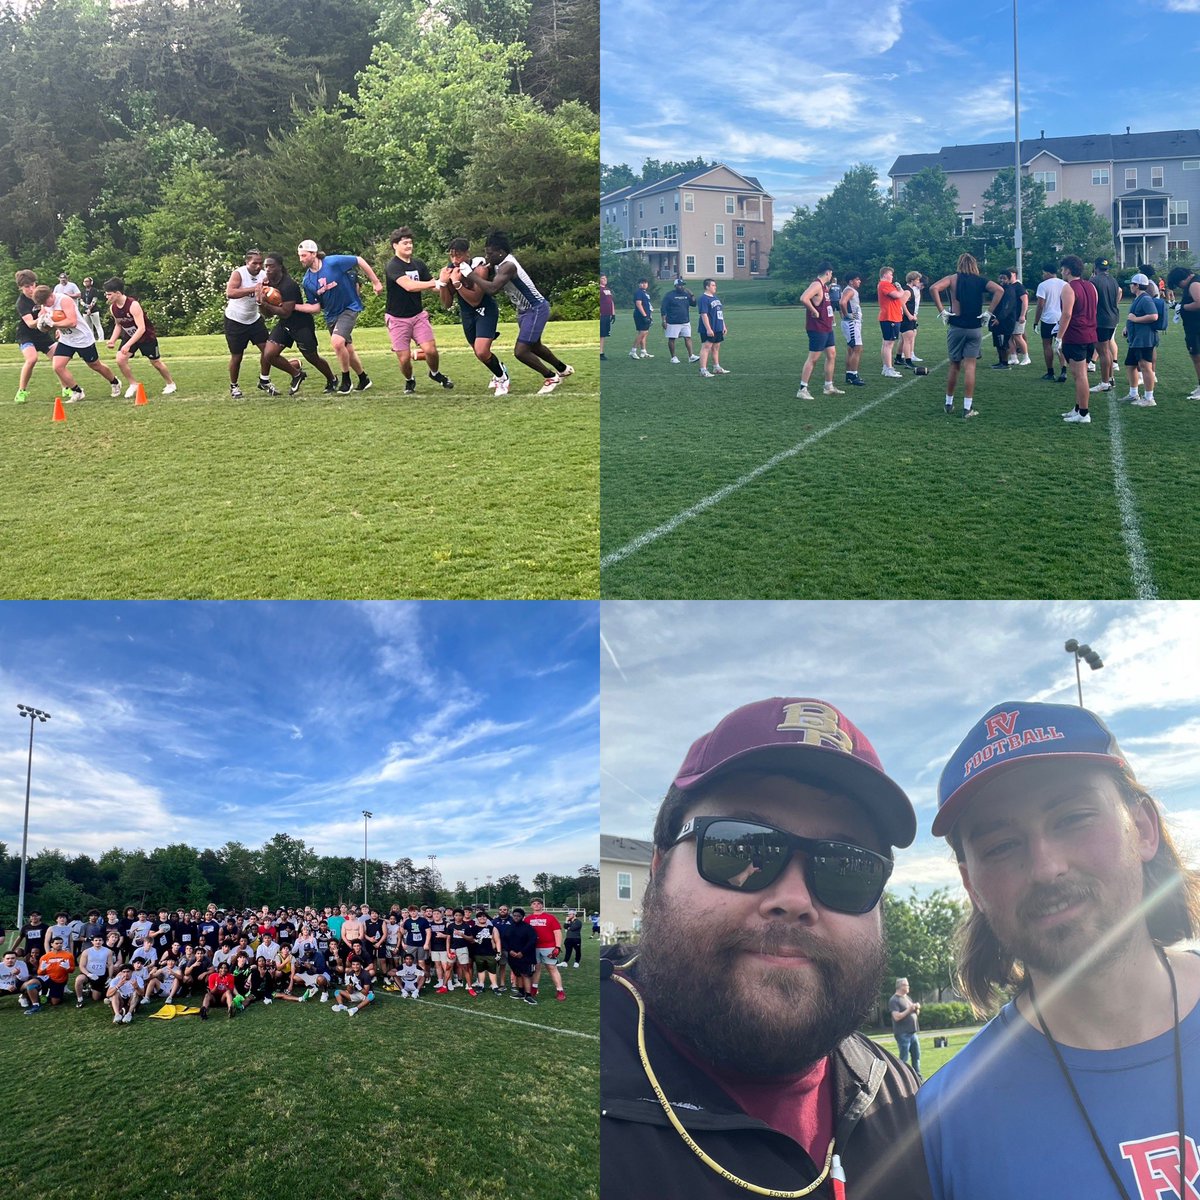 First annual Loudoun Showcase was a huge success! Many thanks to @andrejones1185 and @LeeMCarter3 for allowing me to help get this set up! Many thanks to the many coaches that volunteered to help make this a success! @CoachLong33 @JohnCri48039118 and many more!